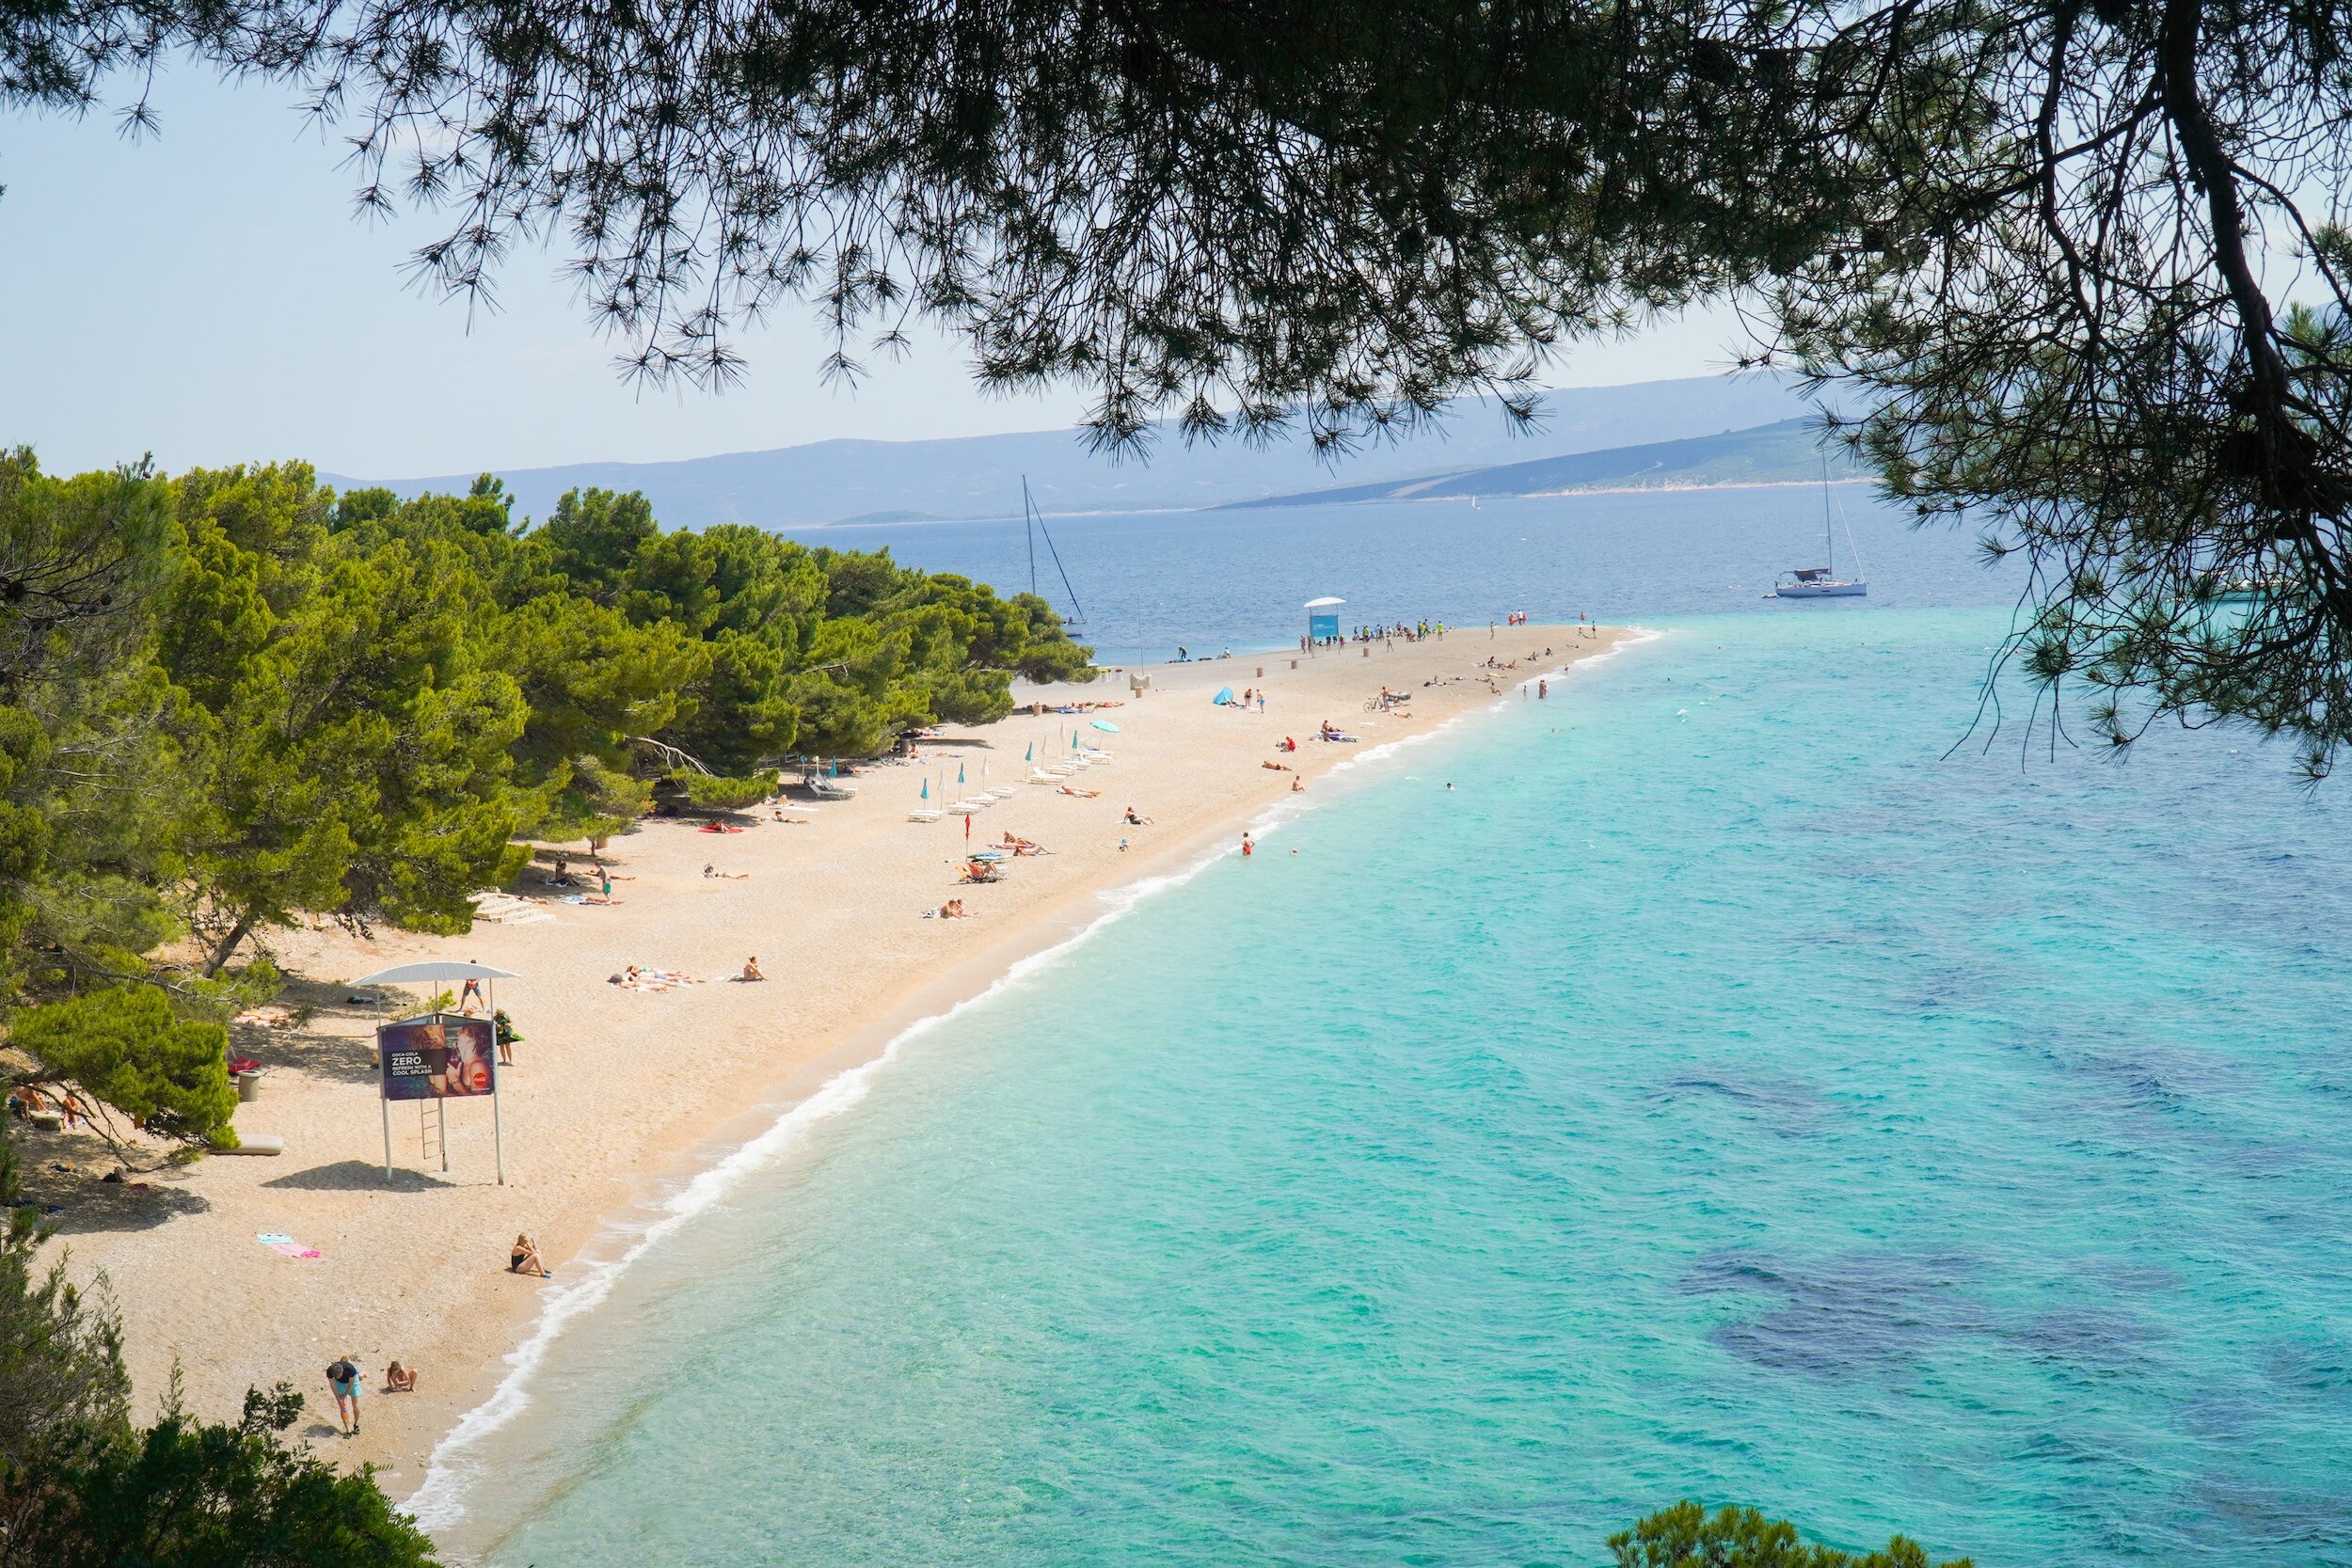 Golden Horn beach, backed on one side by bright green trees and on the other by clear turquoise sea on the Croatian island of Bol.